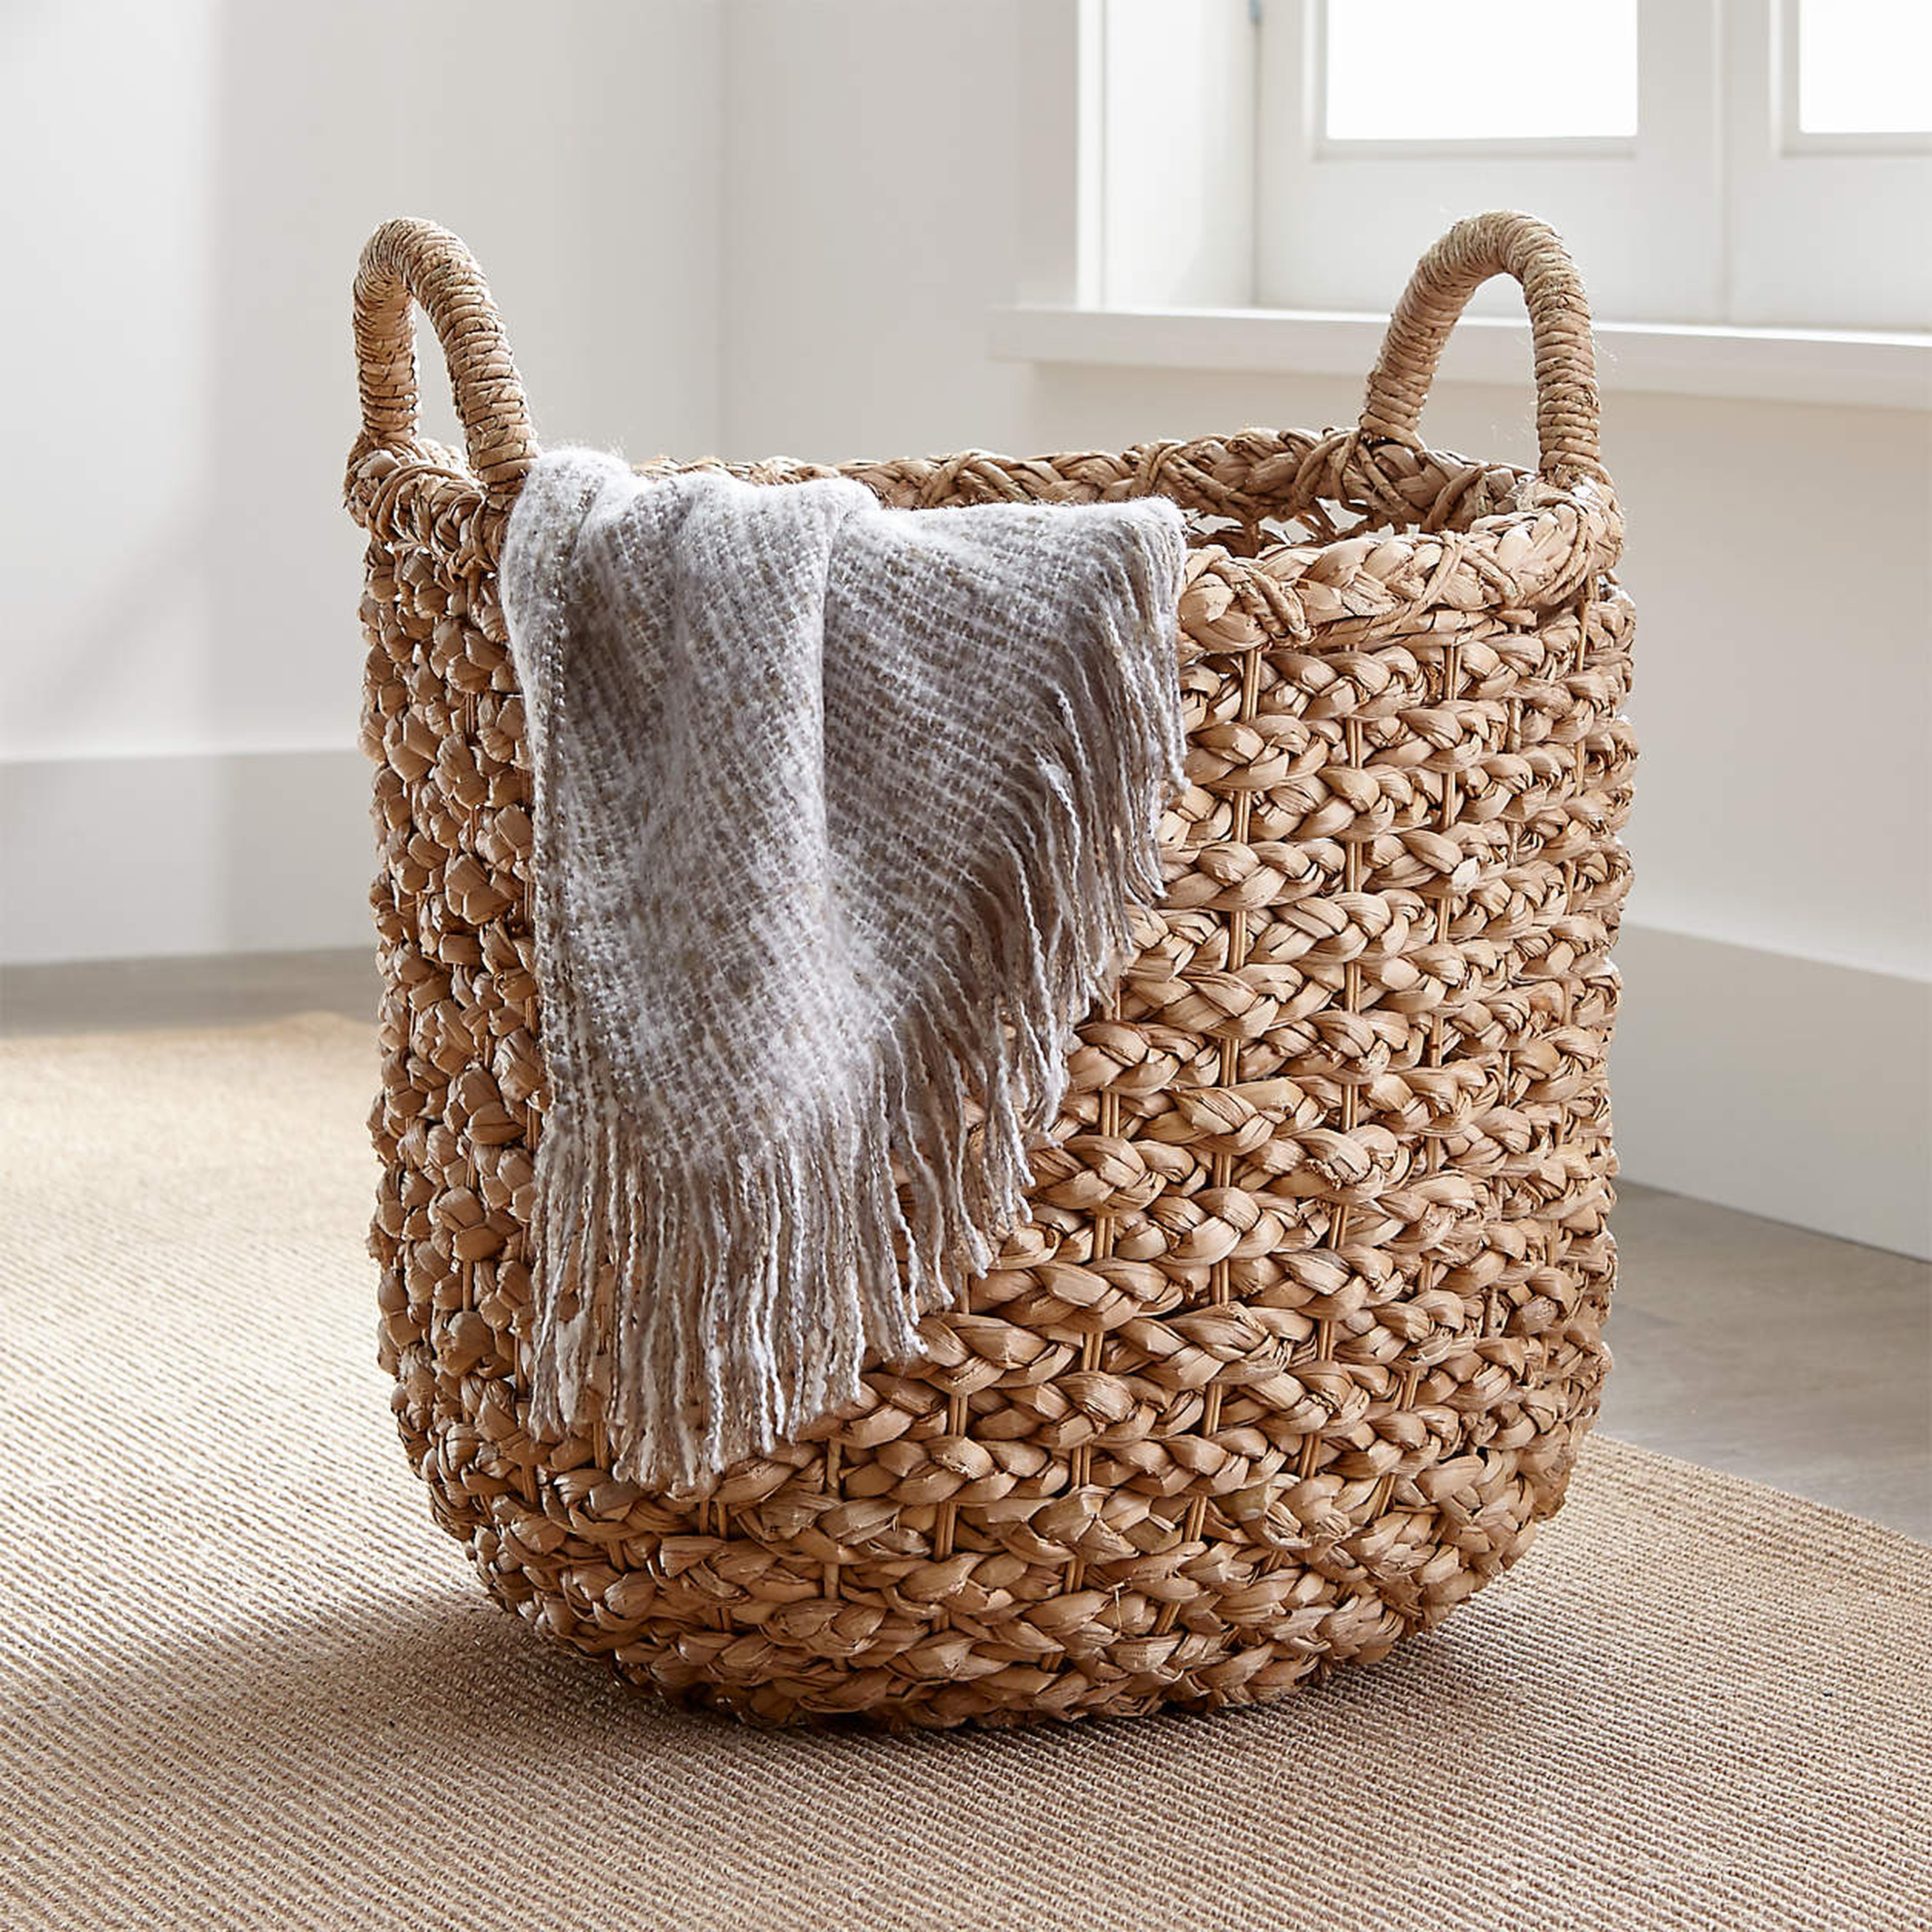 Emlyn Woven Basket - Crate and Barrel